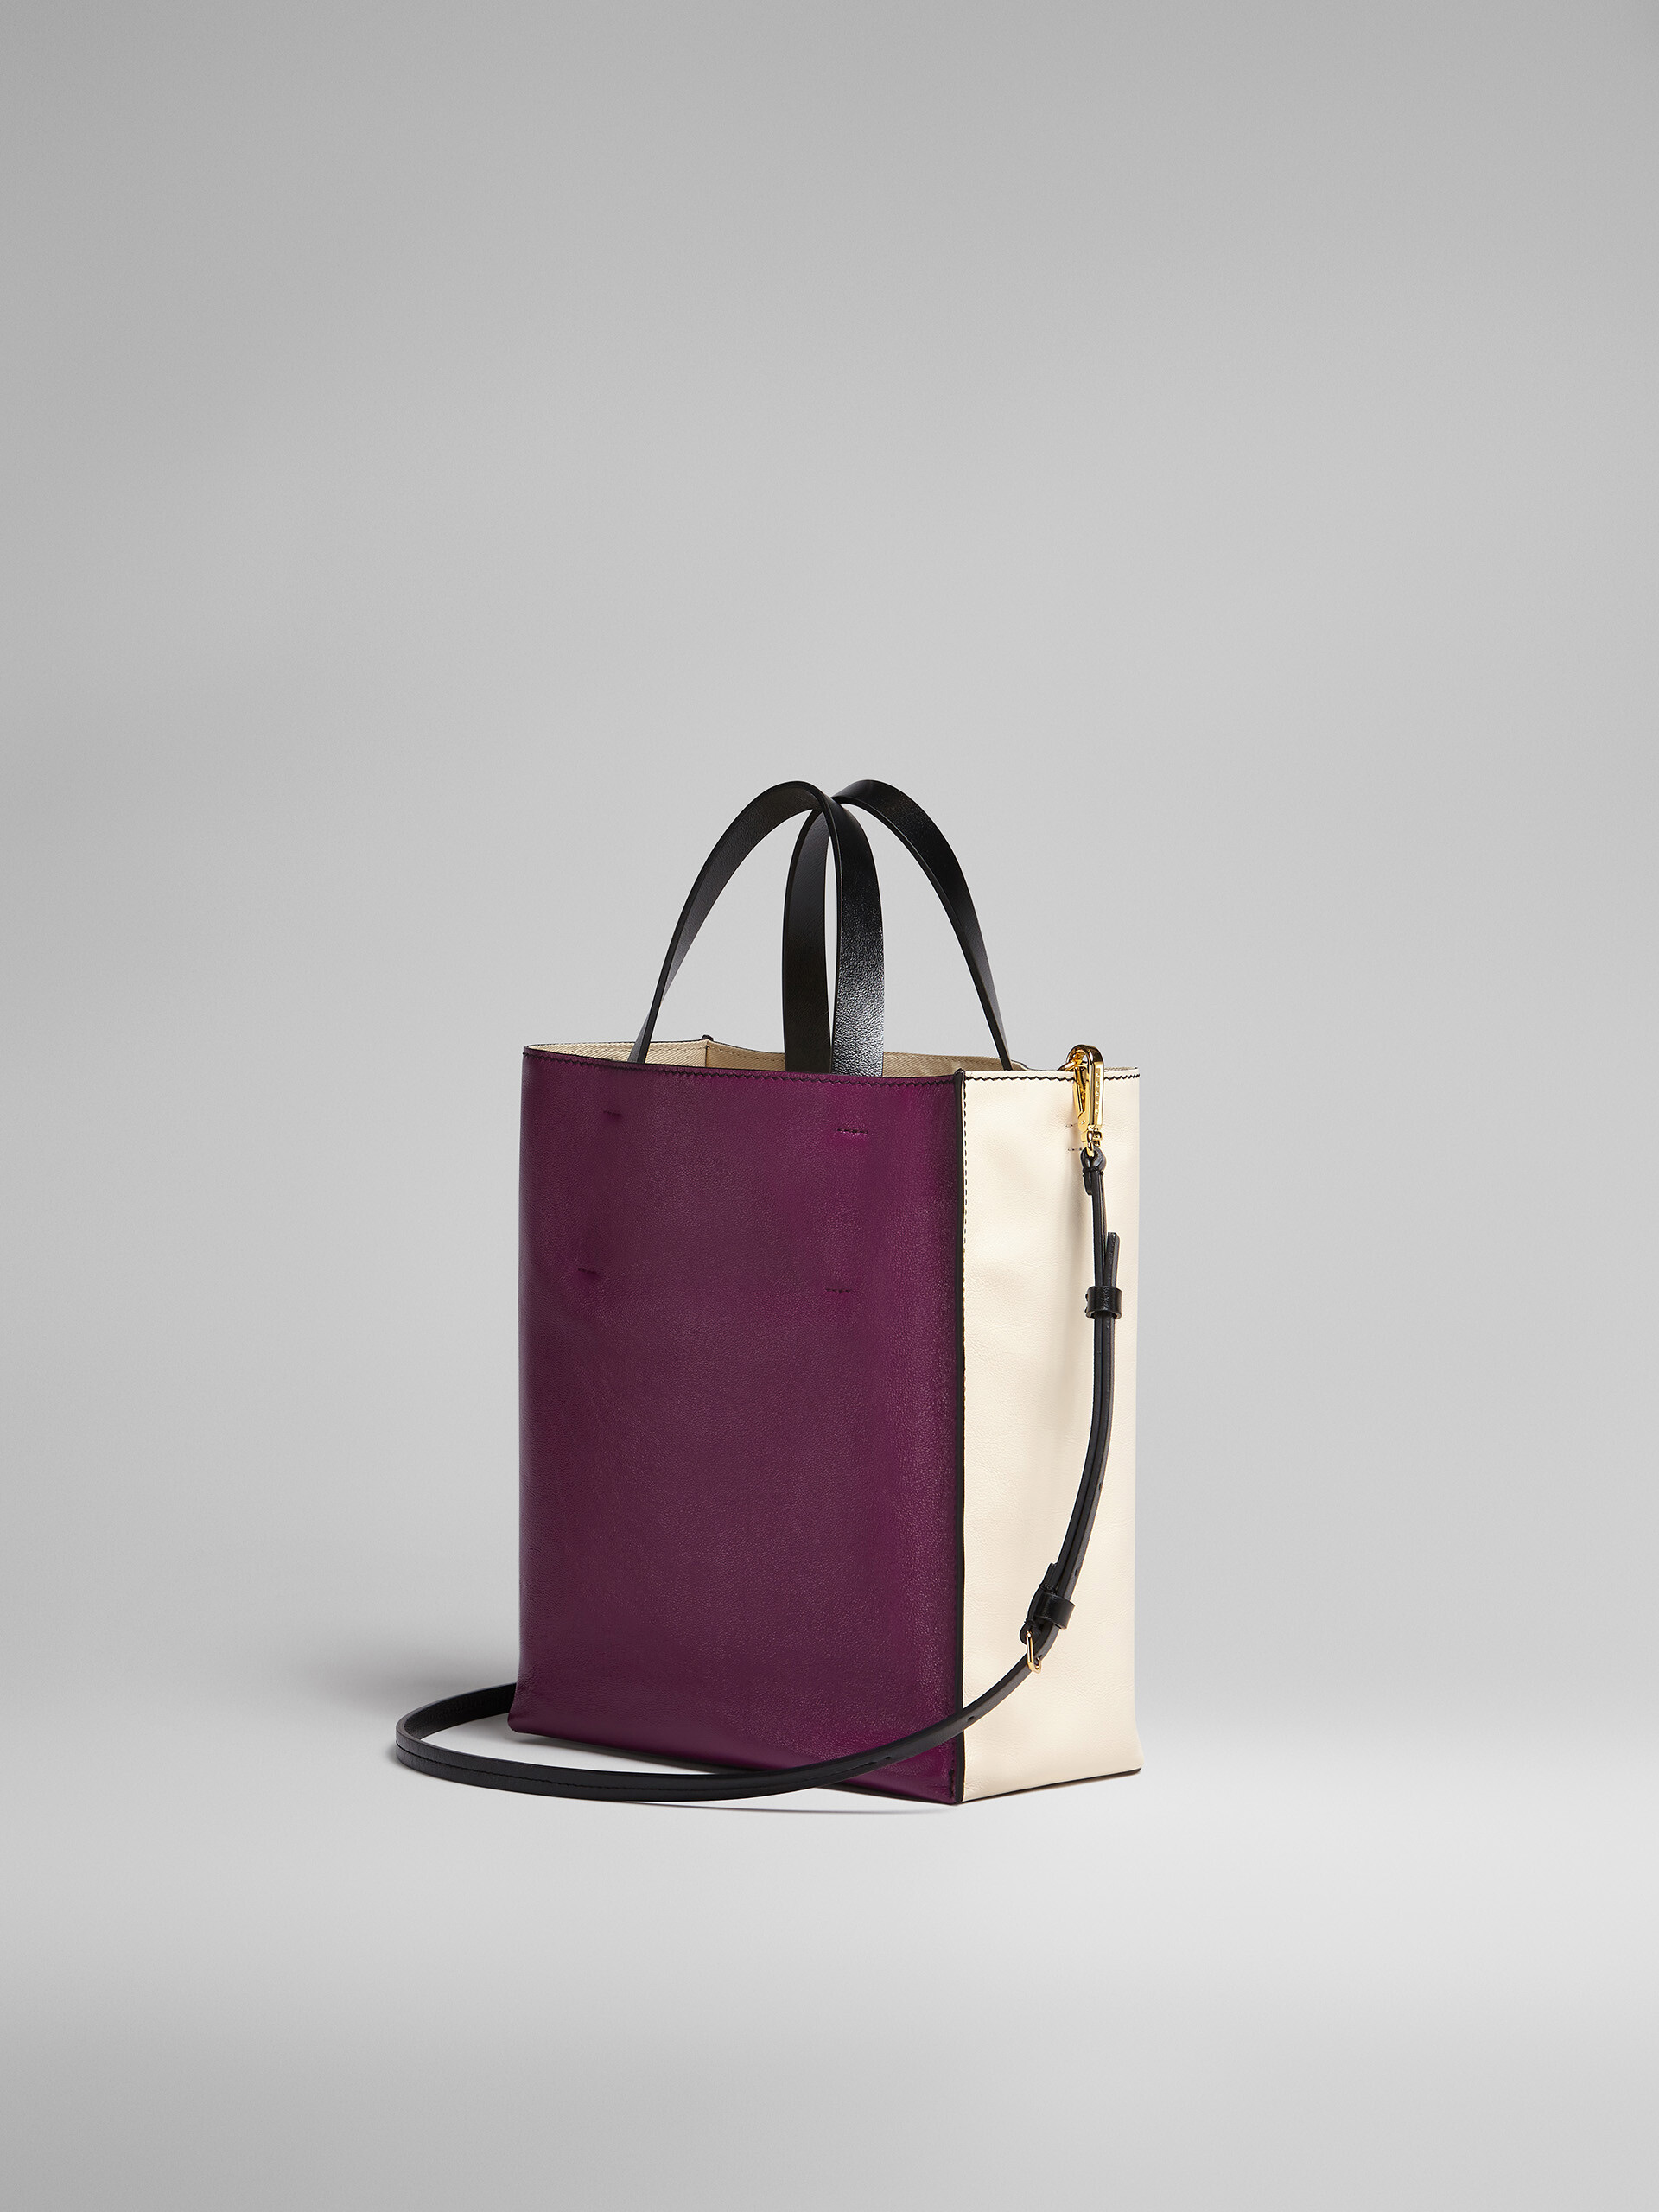 MUSEO SOFT small bag in white and purple leather